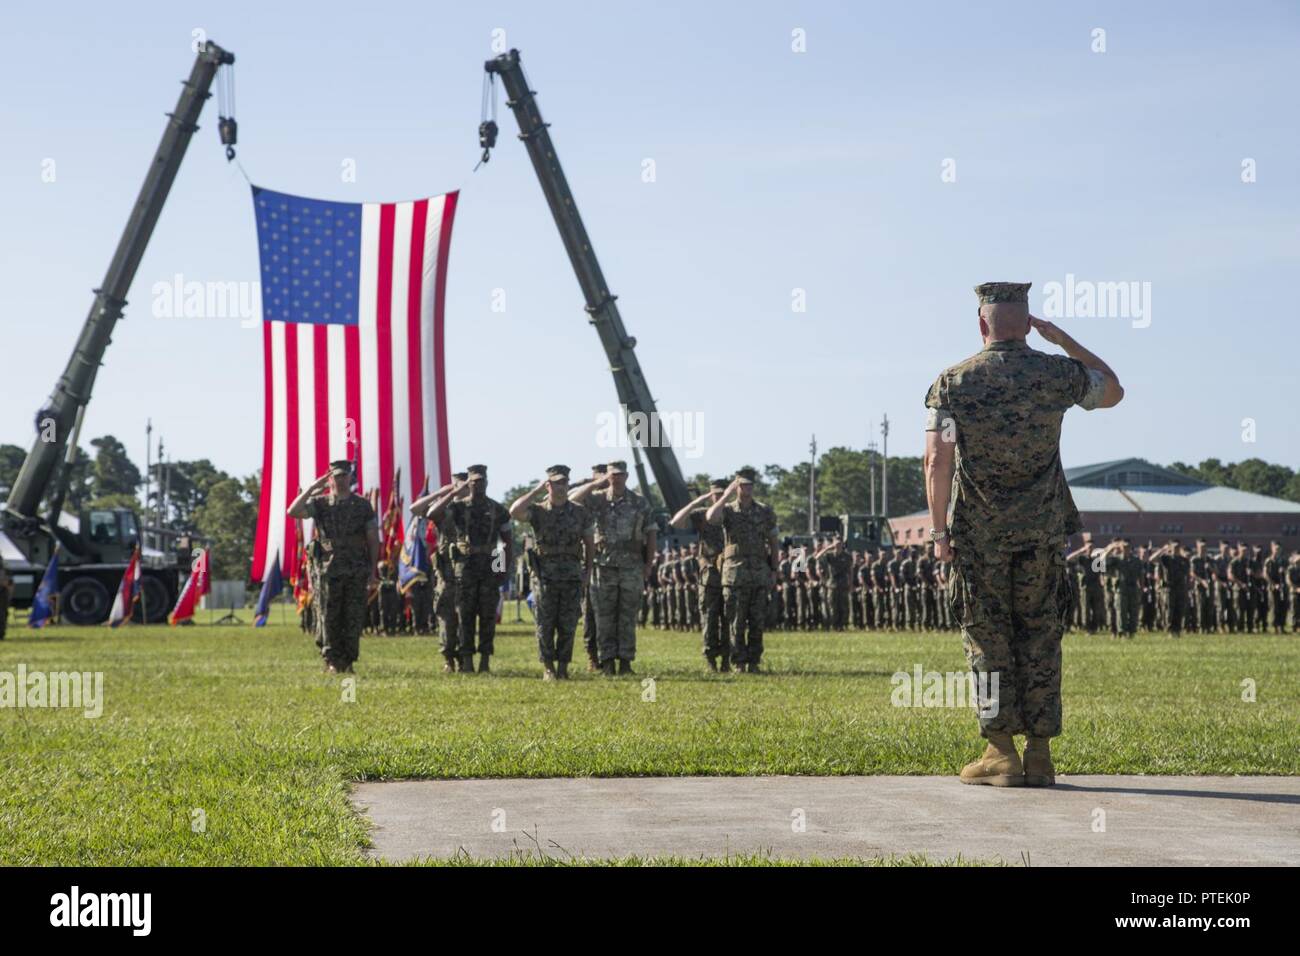 U.S. Marine Corps Lt. Gen. Robert F. Hedelund, commanding general of the II Marine Expeditionary Force (MEF) salutes Marines during a change of command ceremony on Camp Lejeune, N.C., July 14, 2017. During the ceremony, Maj. Gen. Walter L. Miller Jr. relinquished his command as commanding general of II MEF to Hedelund. Stock Photo